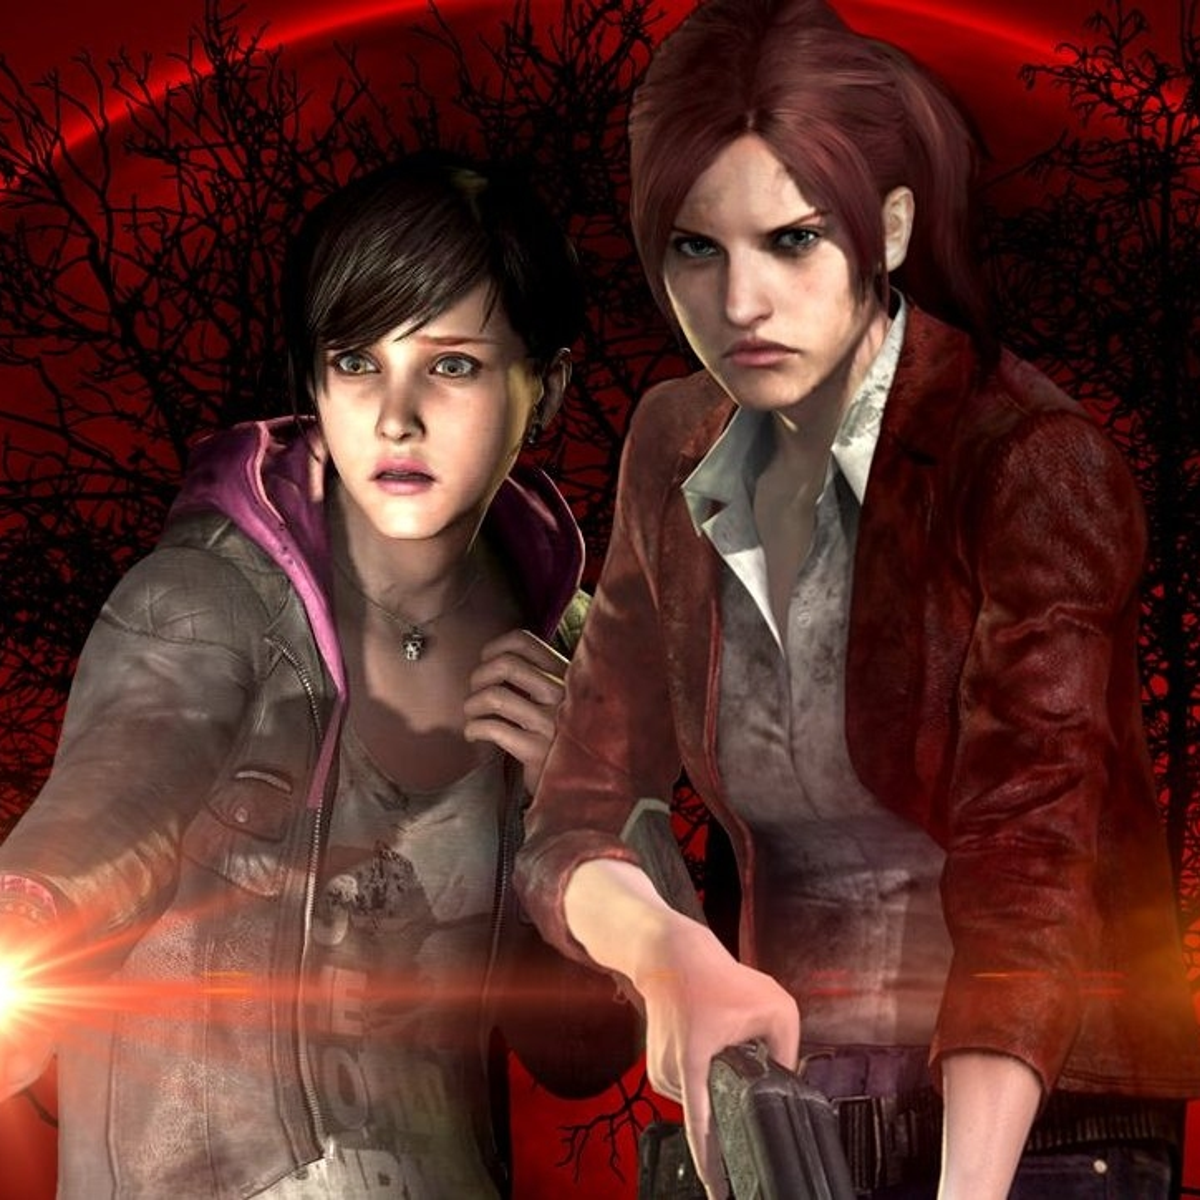 Get To Know Resident Evil Revelations 2's Claire And Moira - Game